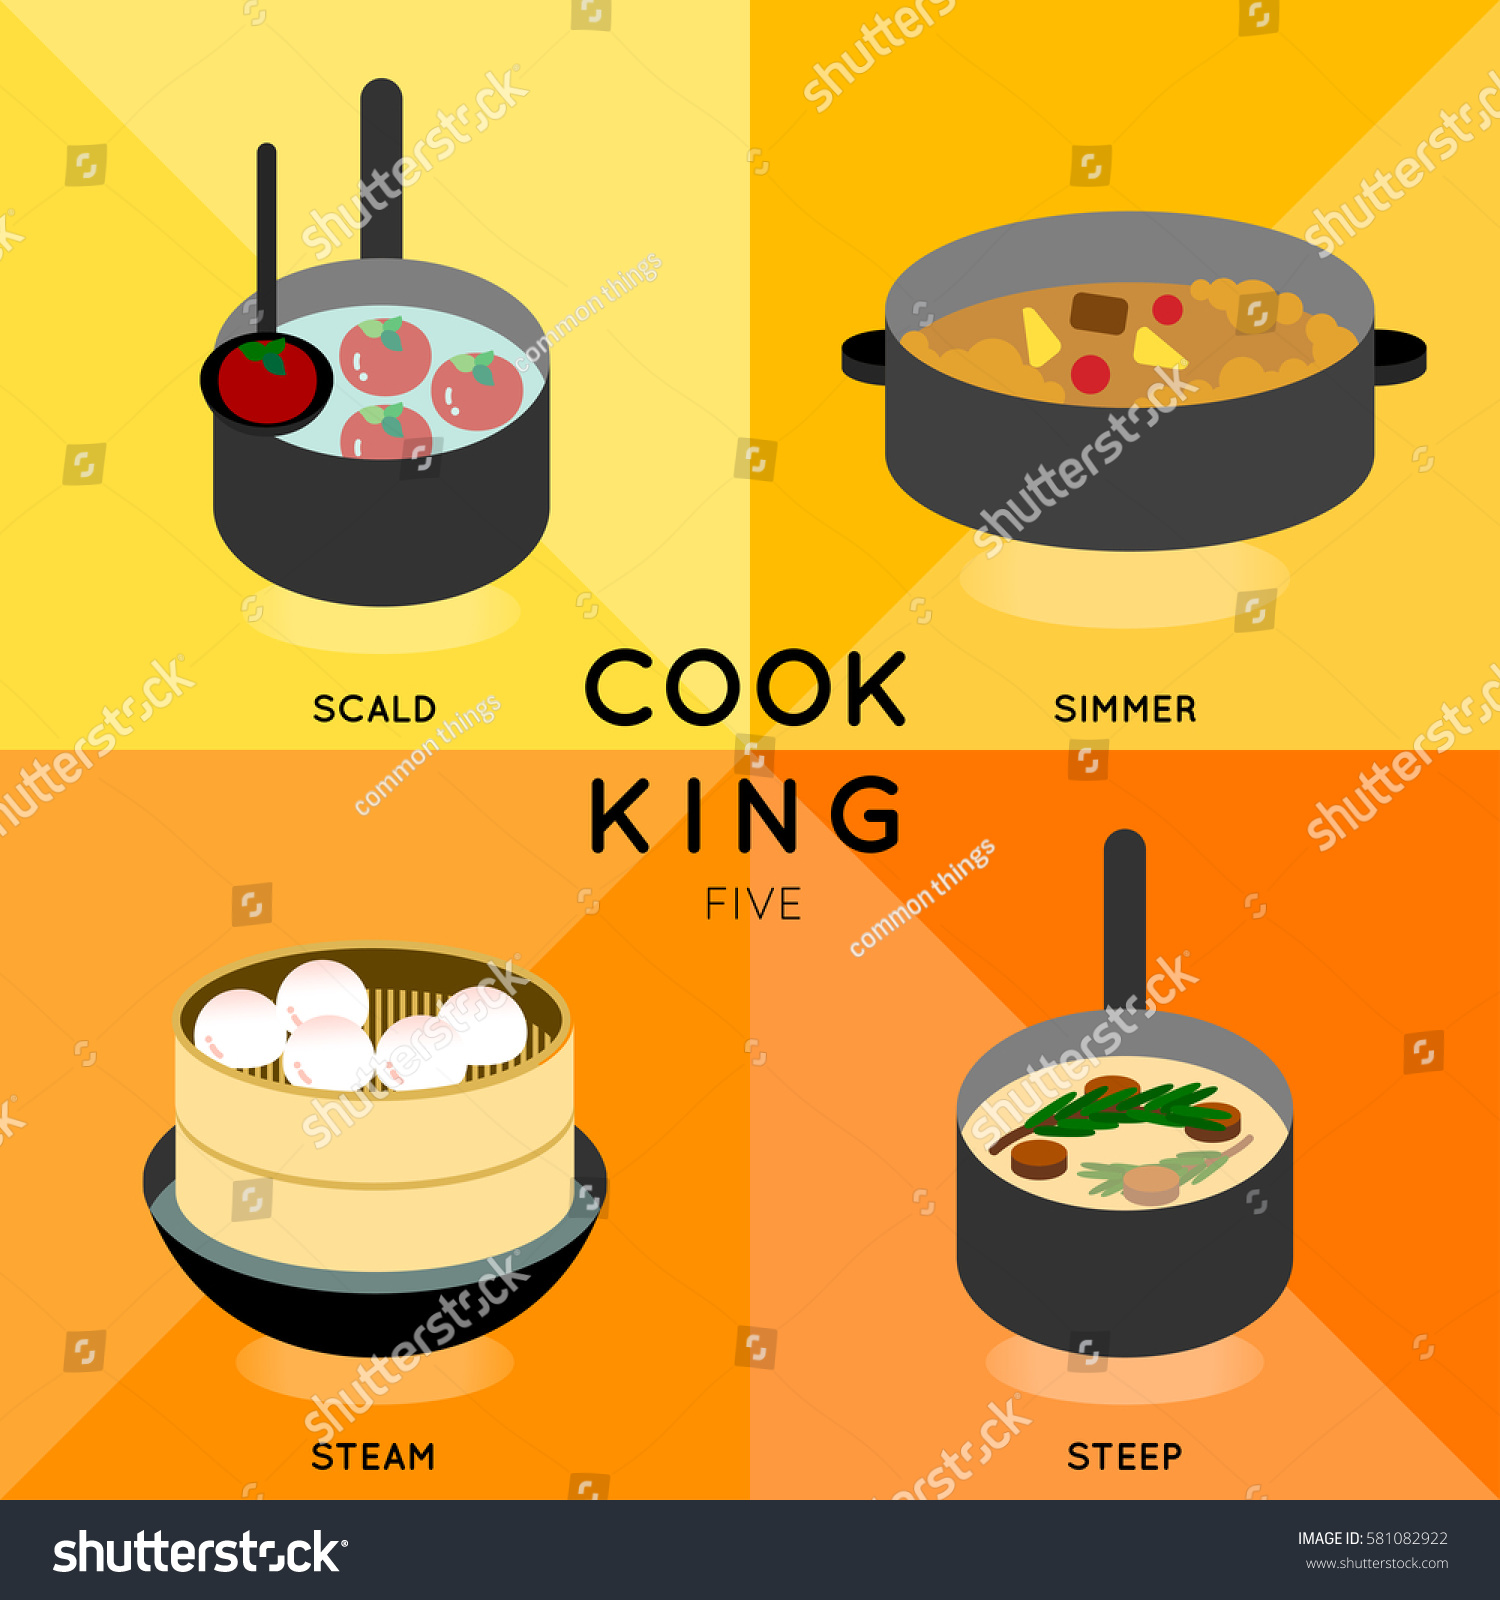 Steam method of cooking фото 102